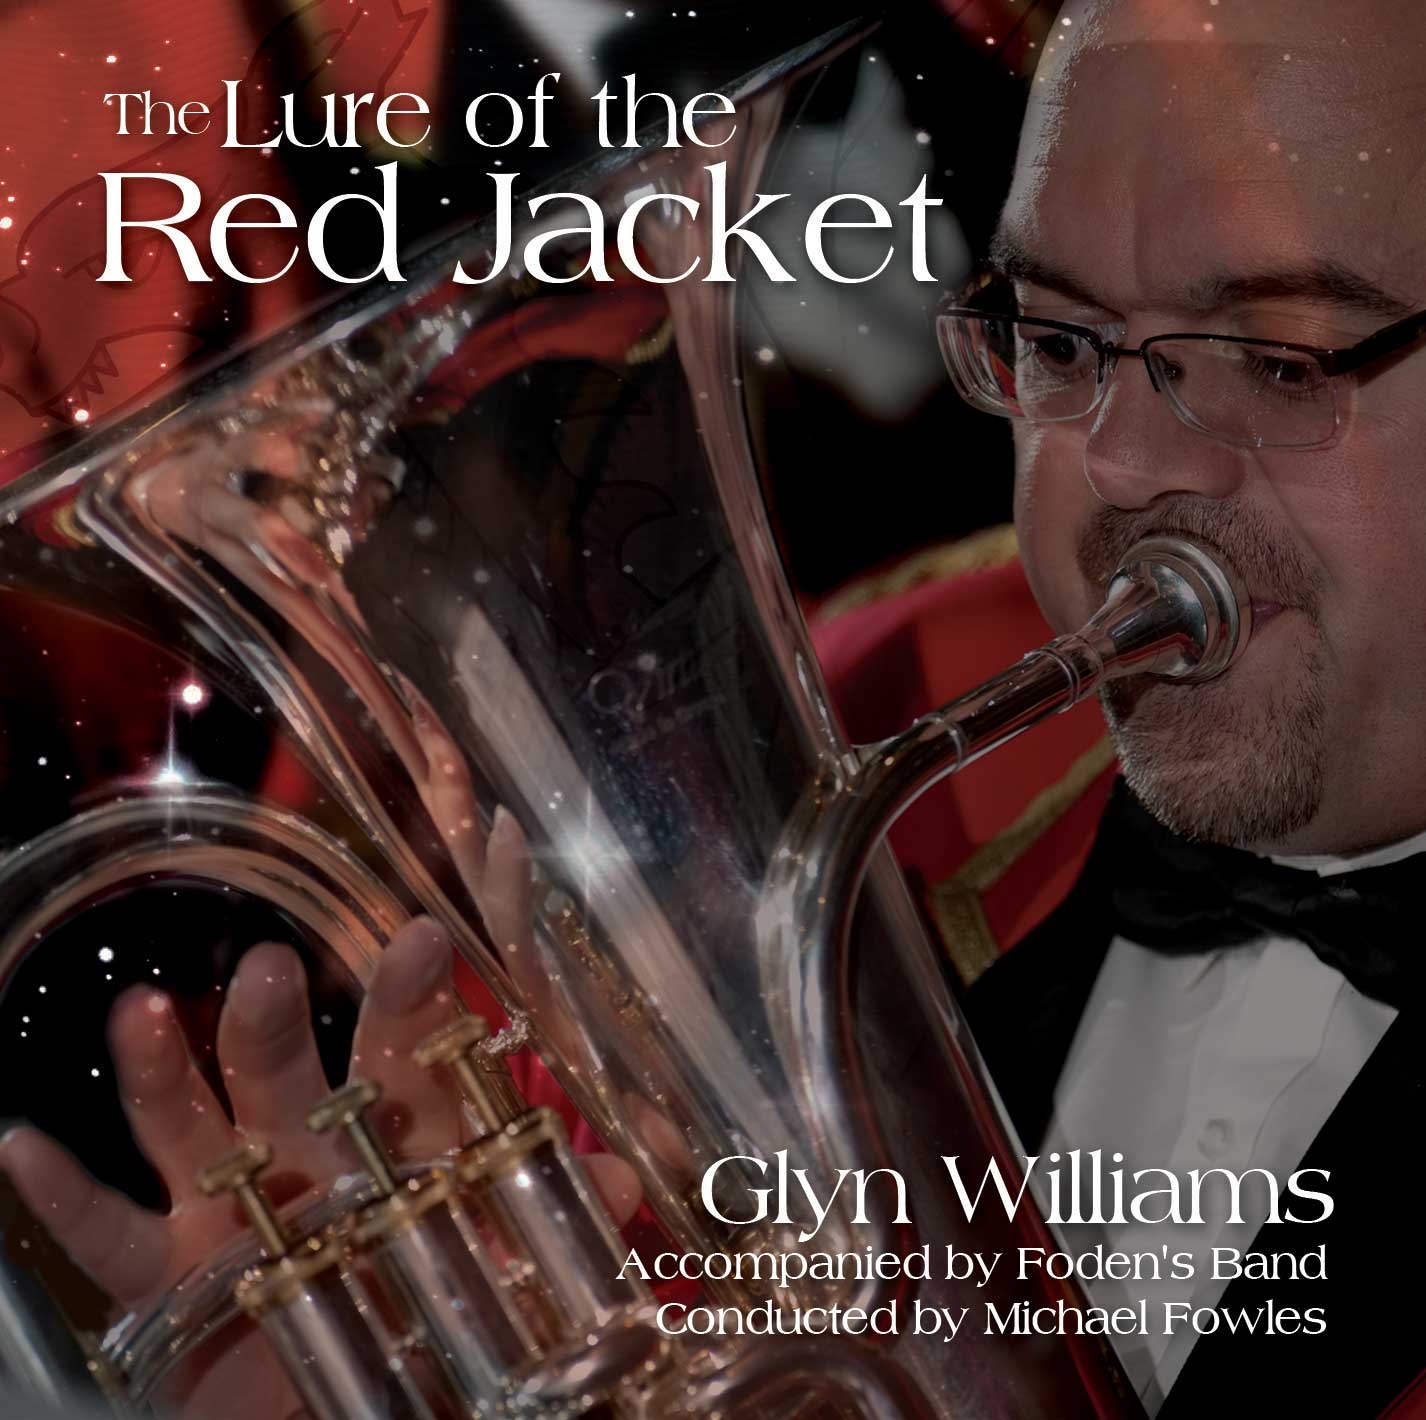 The Lure of the Red Jacket - CD